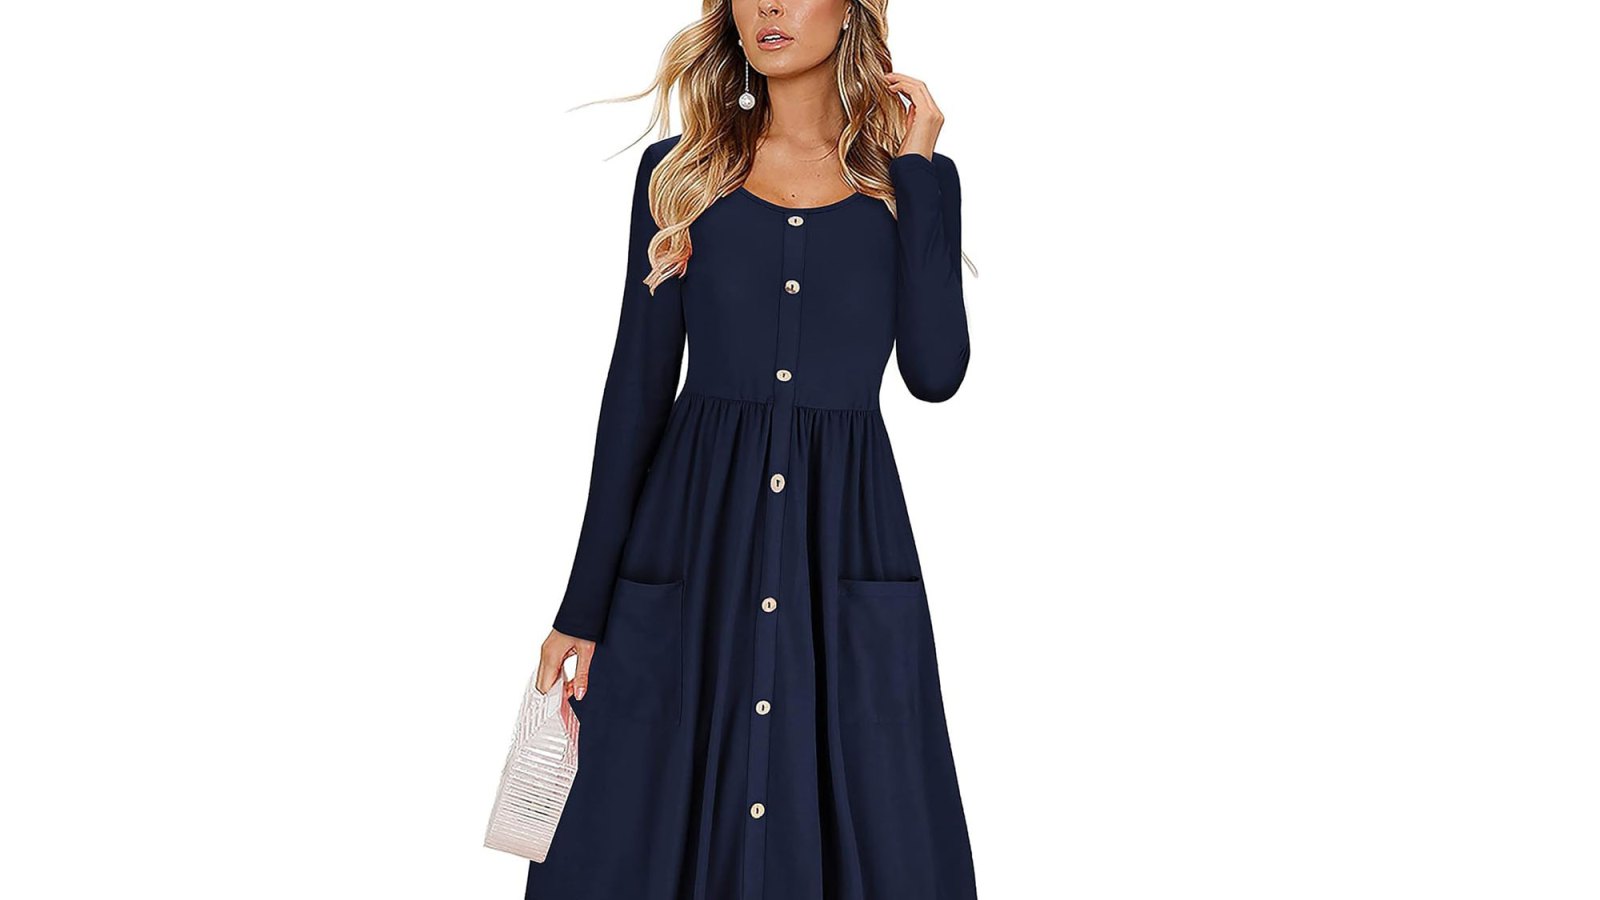 21 Chic and Comfy Long-Sleeve Dresses Under $25 at